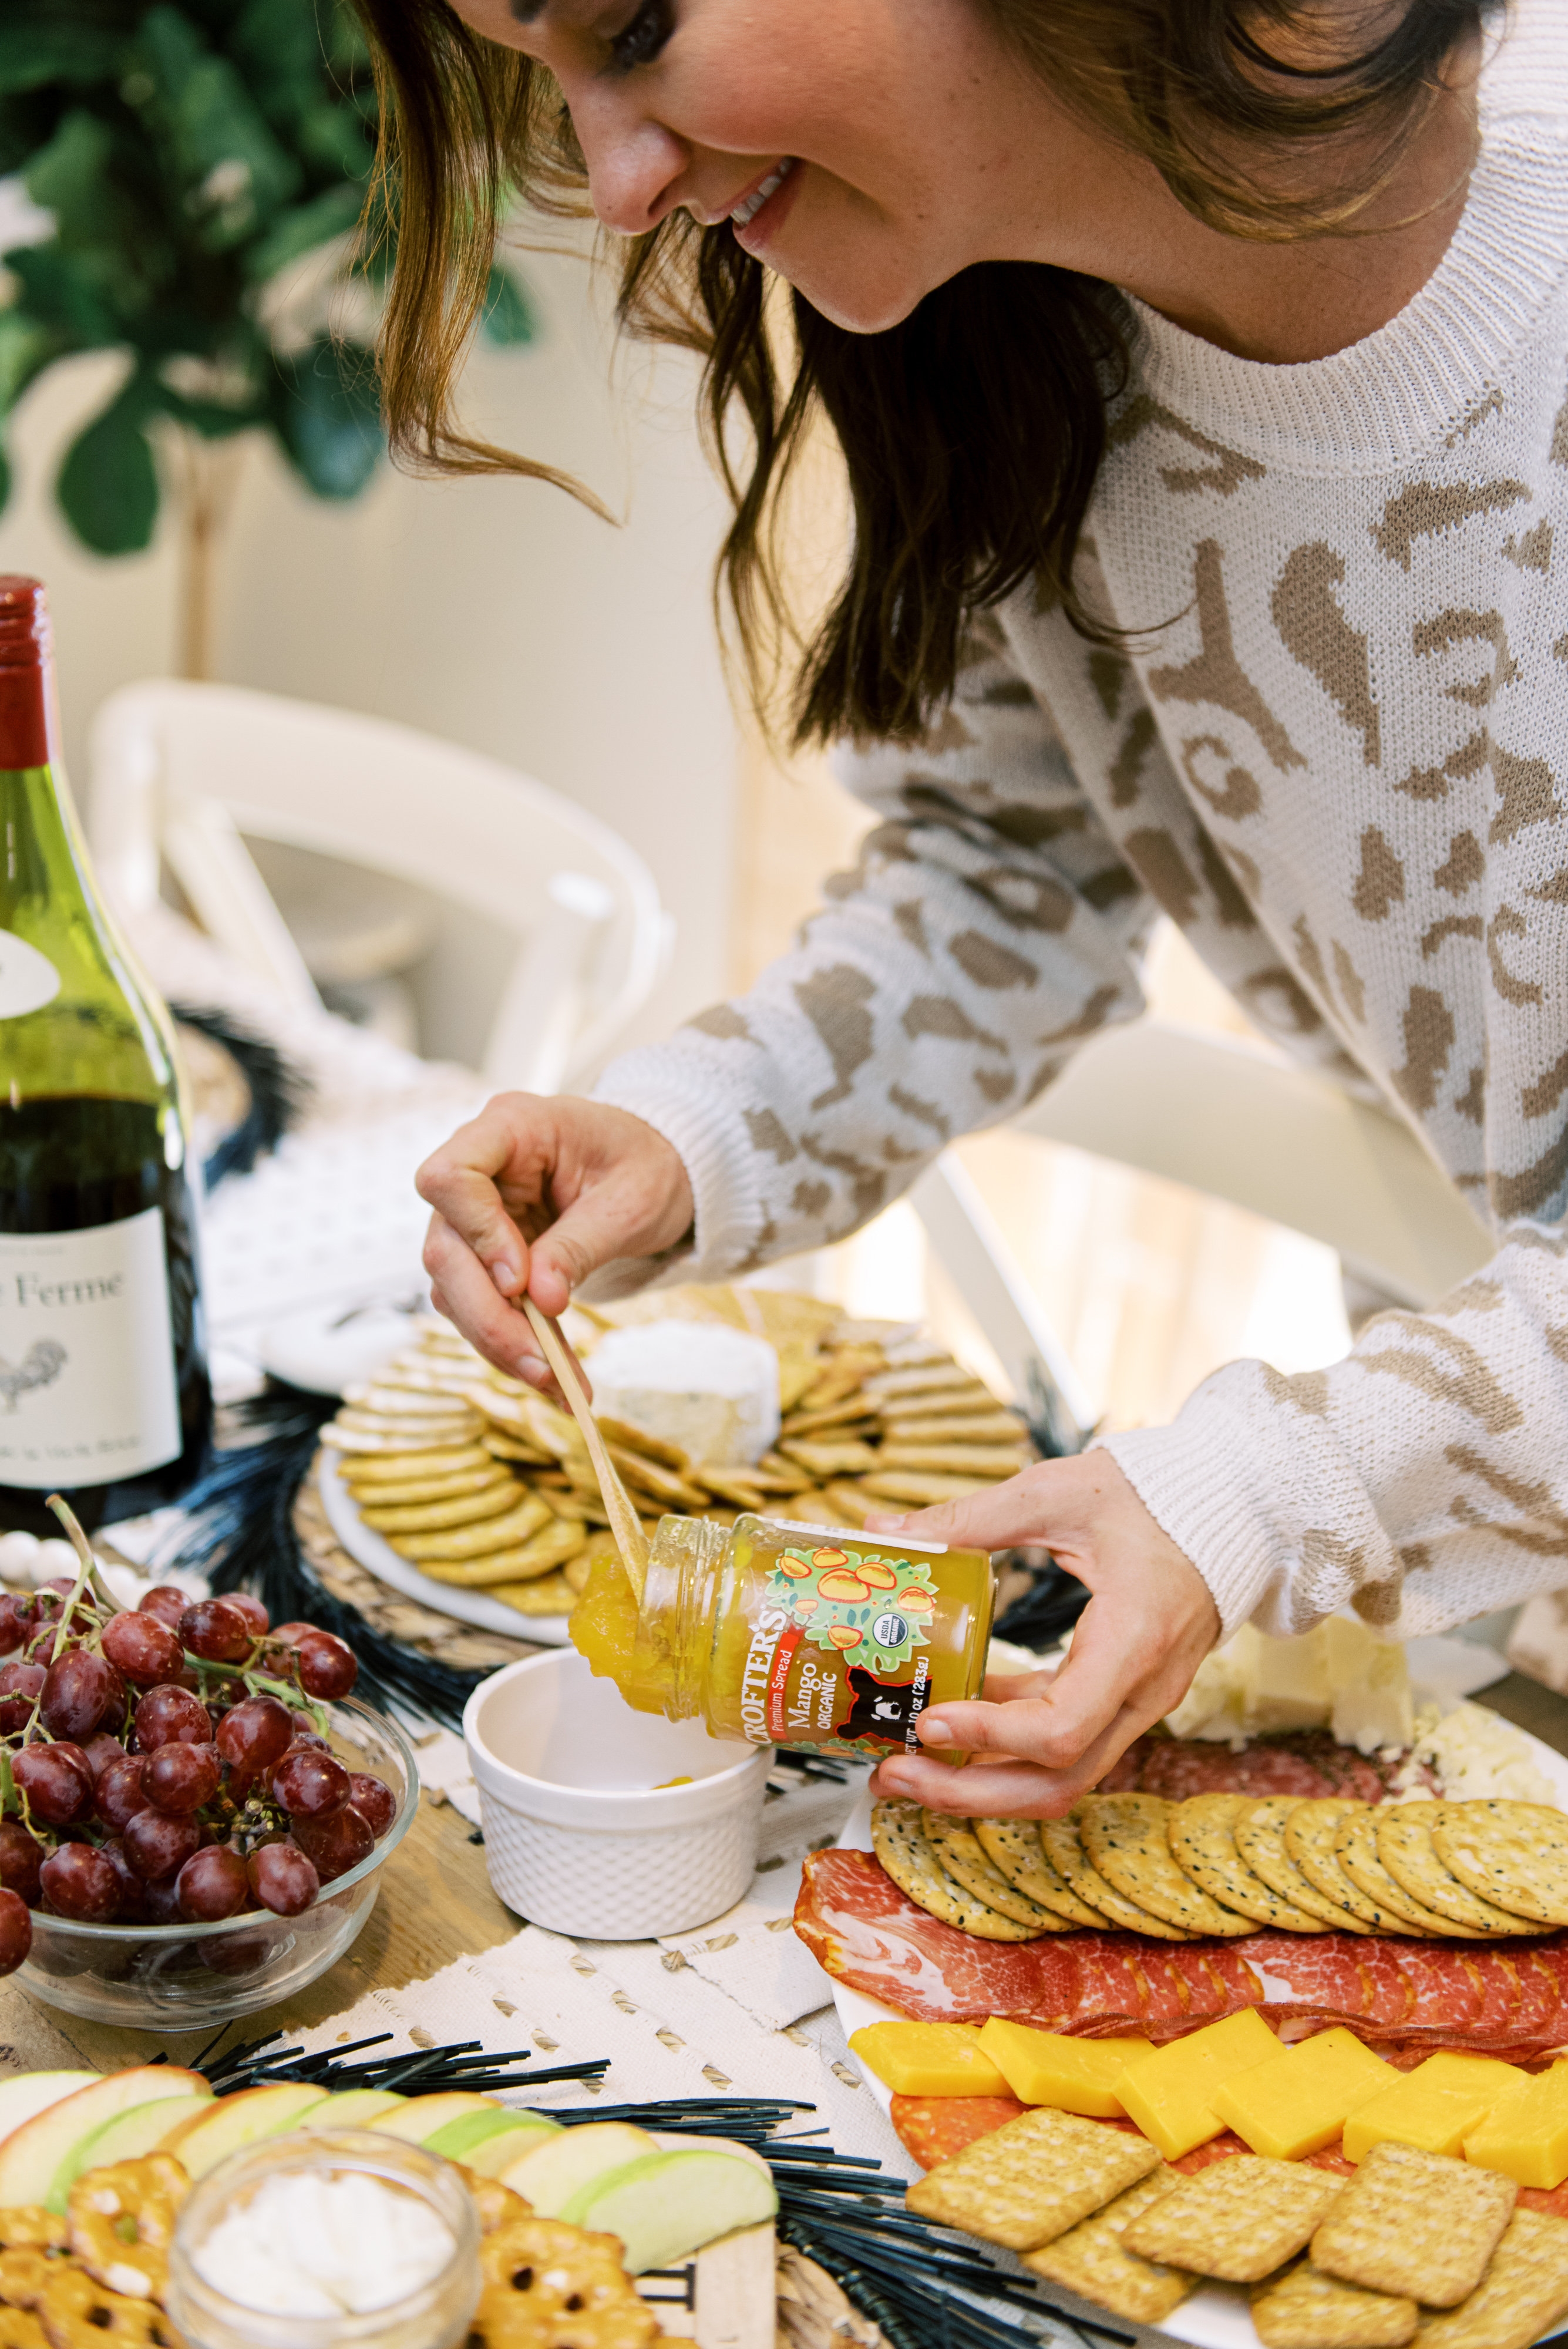 8 Essentials To Make The Perfect Fall Charcuterie Board by Life + Style Blogger, Heather Brown // My Life Well Loved